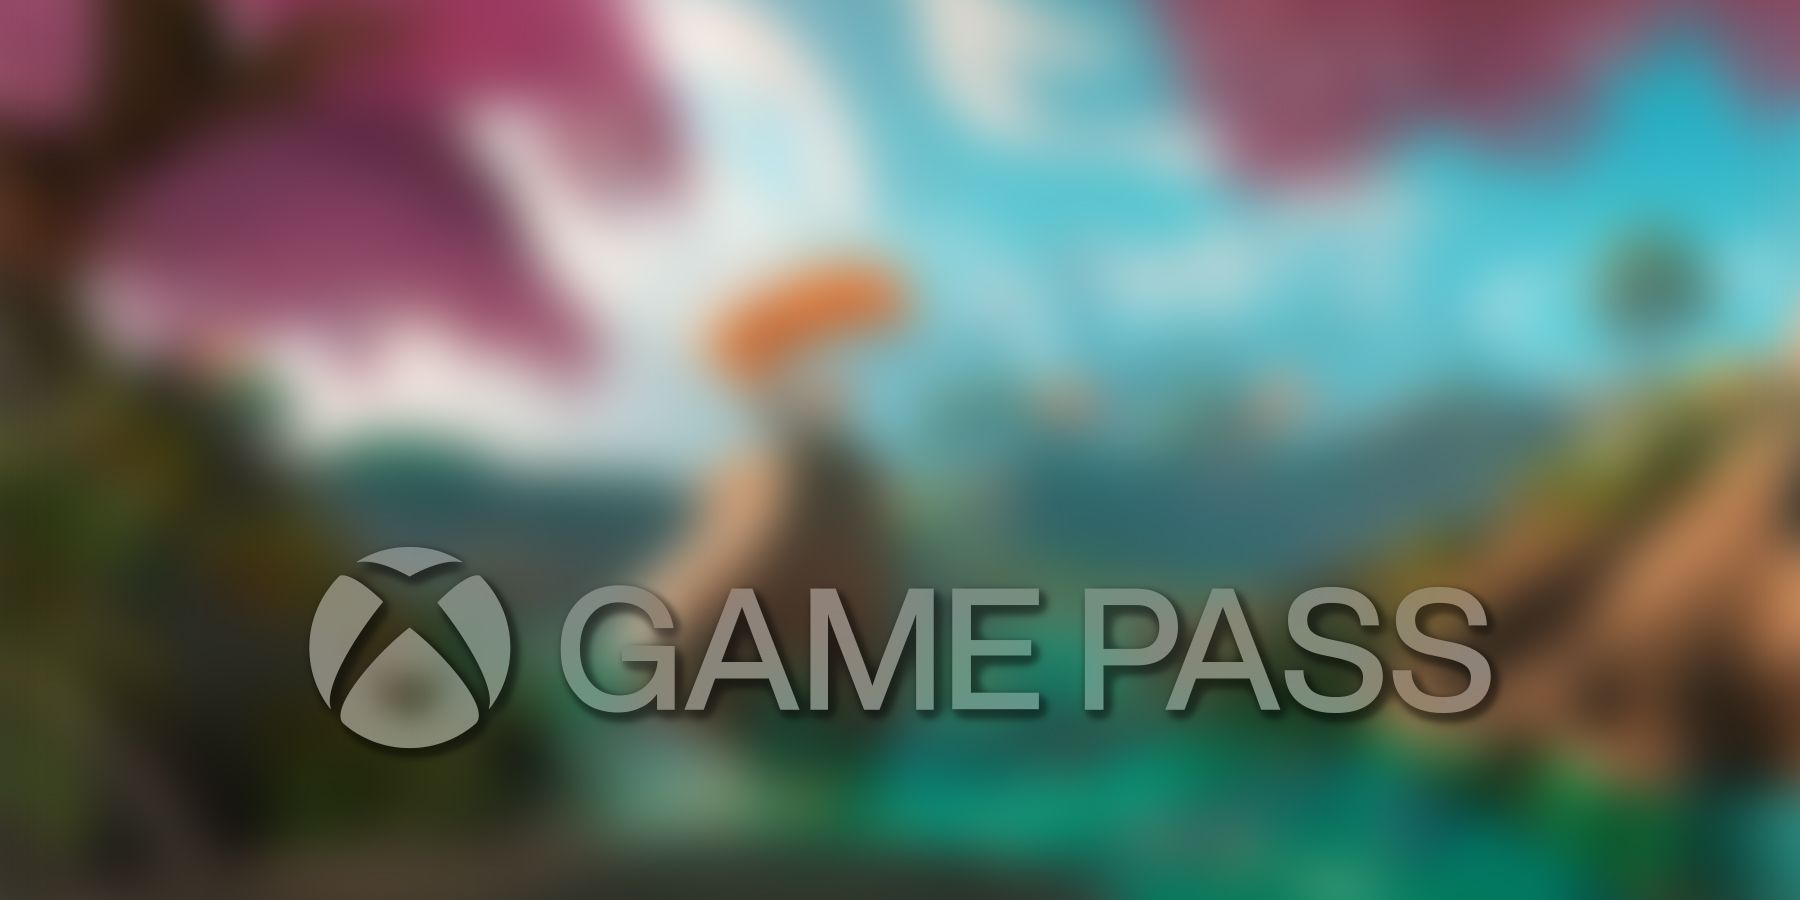 lightyear frontier blurred with xbox game pass logo